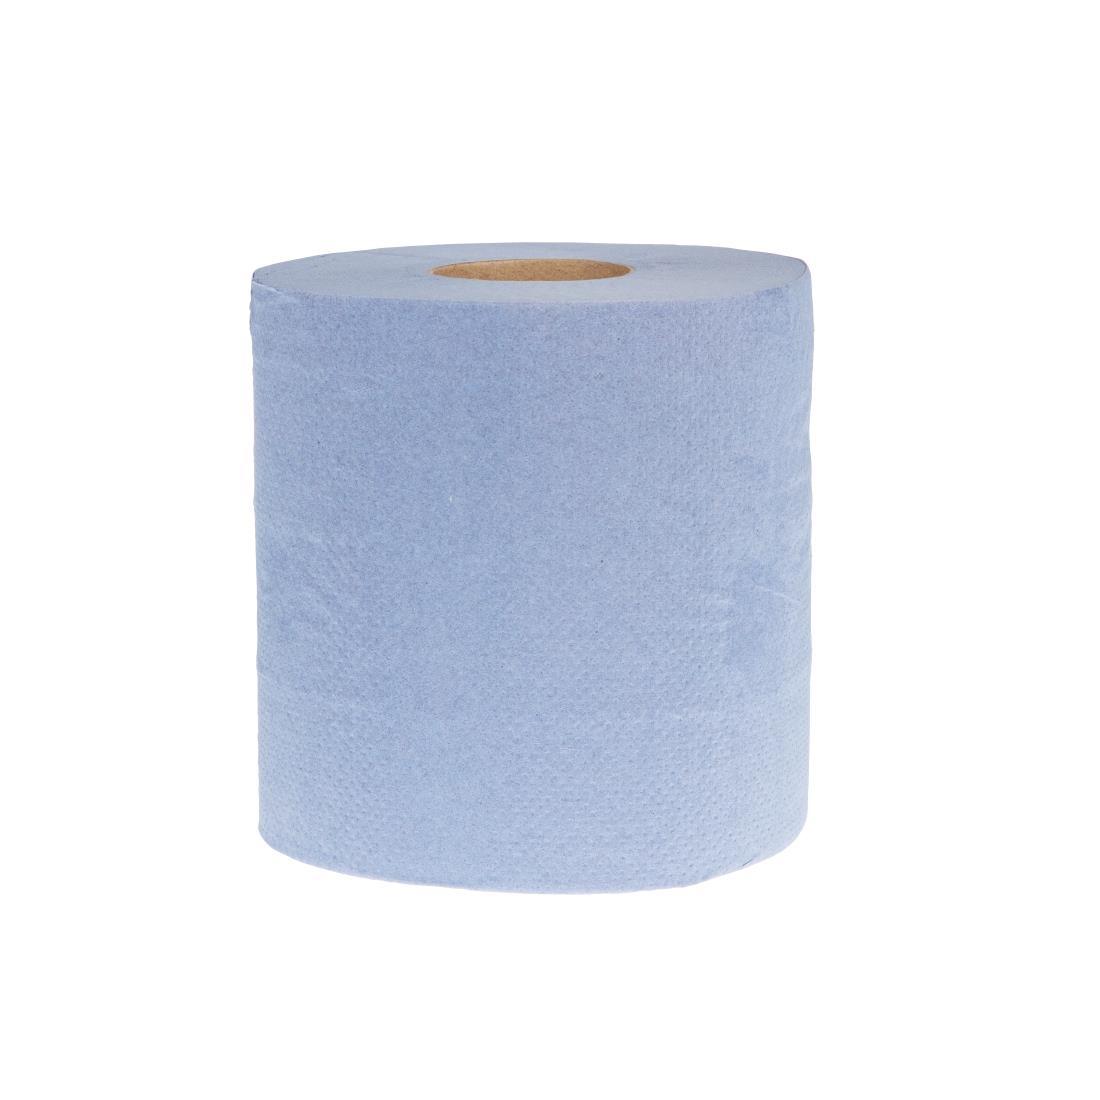 Jantex Centrefeed Blue Rolls 2-Ply 120m (Pack of 6) - DL921  - 2